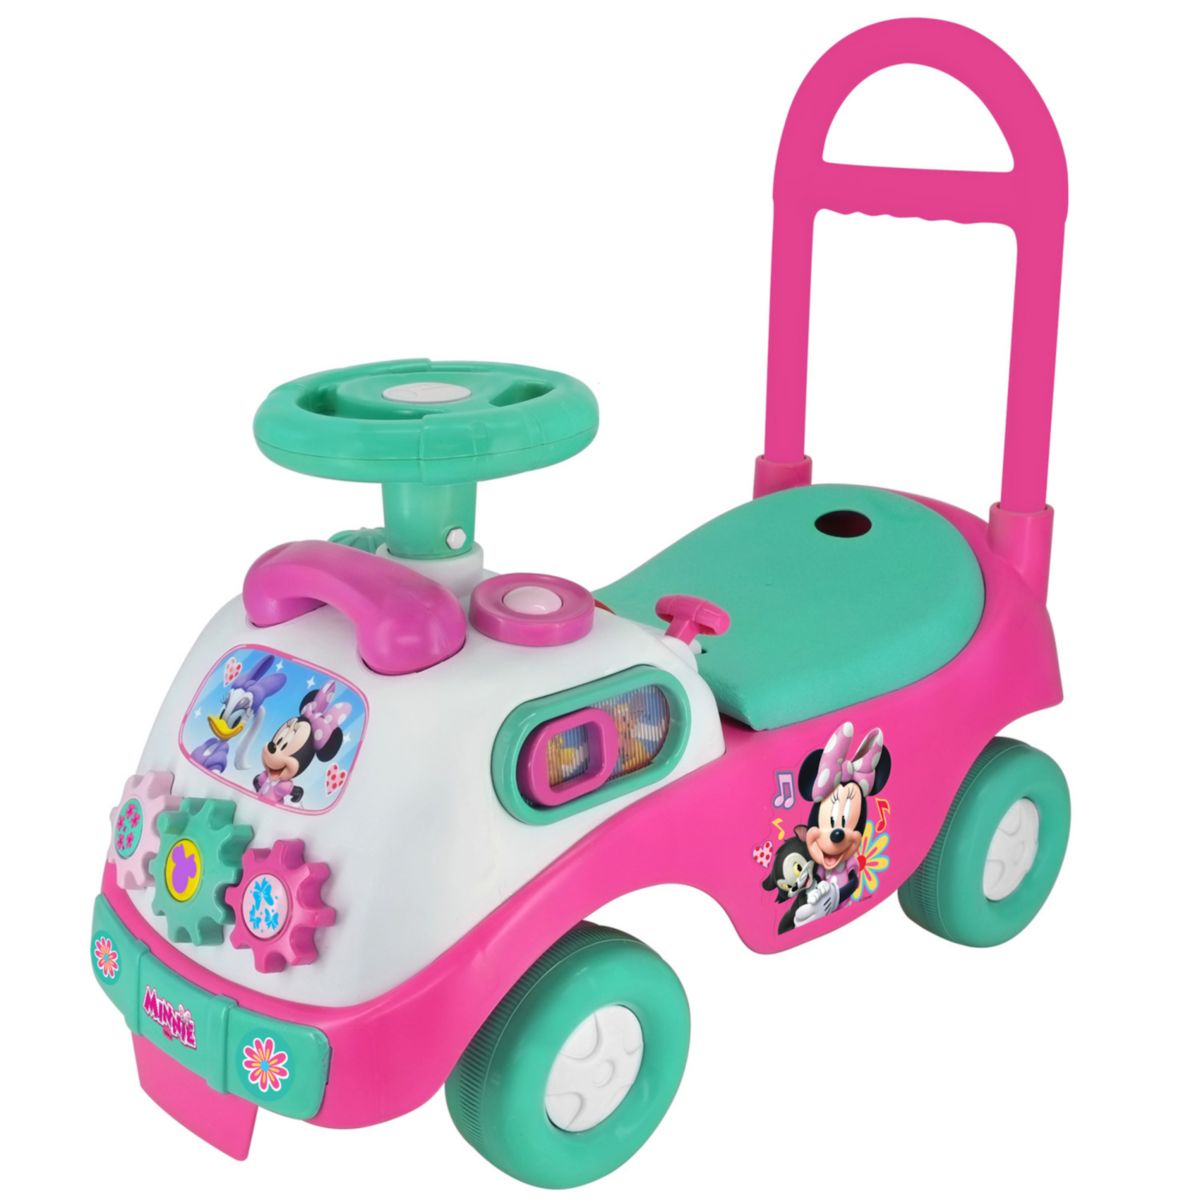 Disney's Minnie Mouse Toddler My First Activity Ride-On Foot-to-Floor Vehicle with Interactive Piano Keys Dashboard by Kiddieland Kiddieland